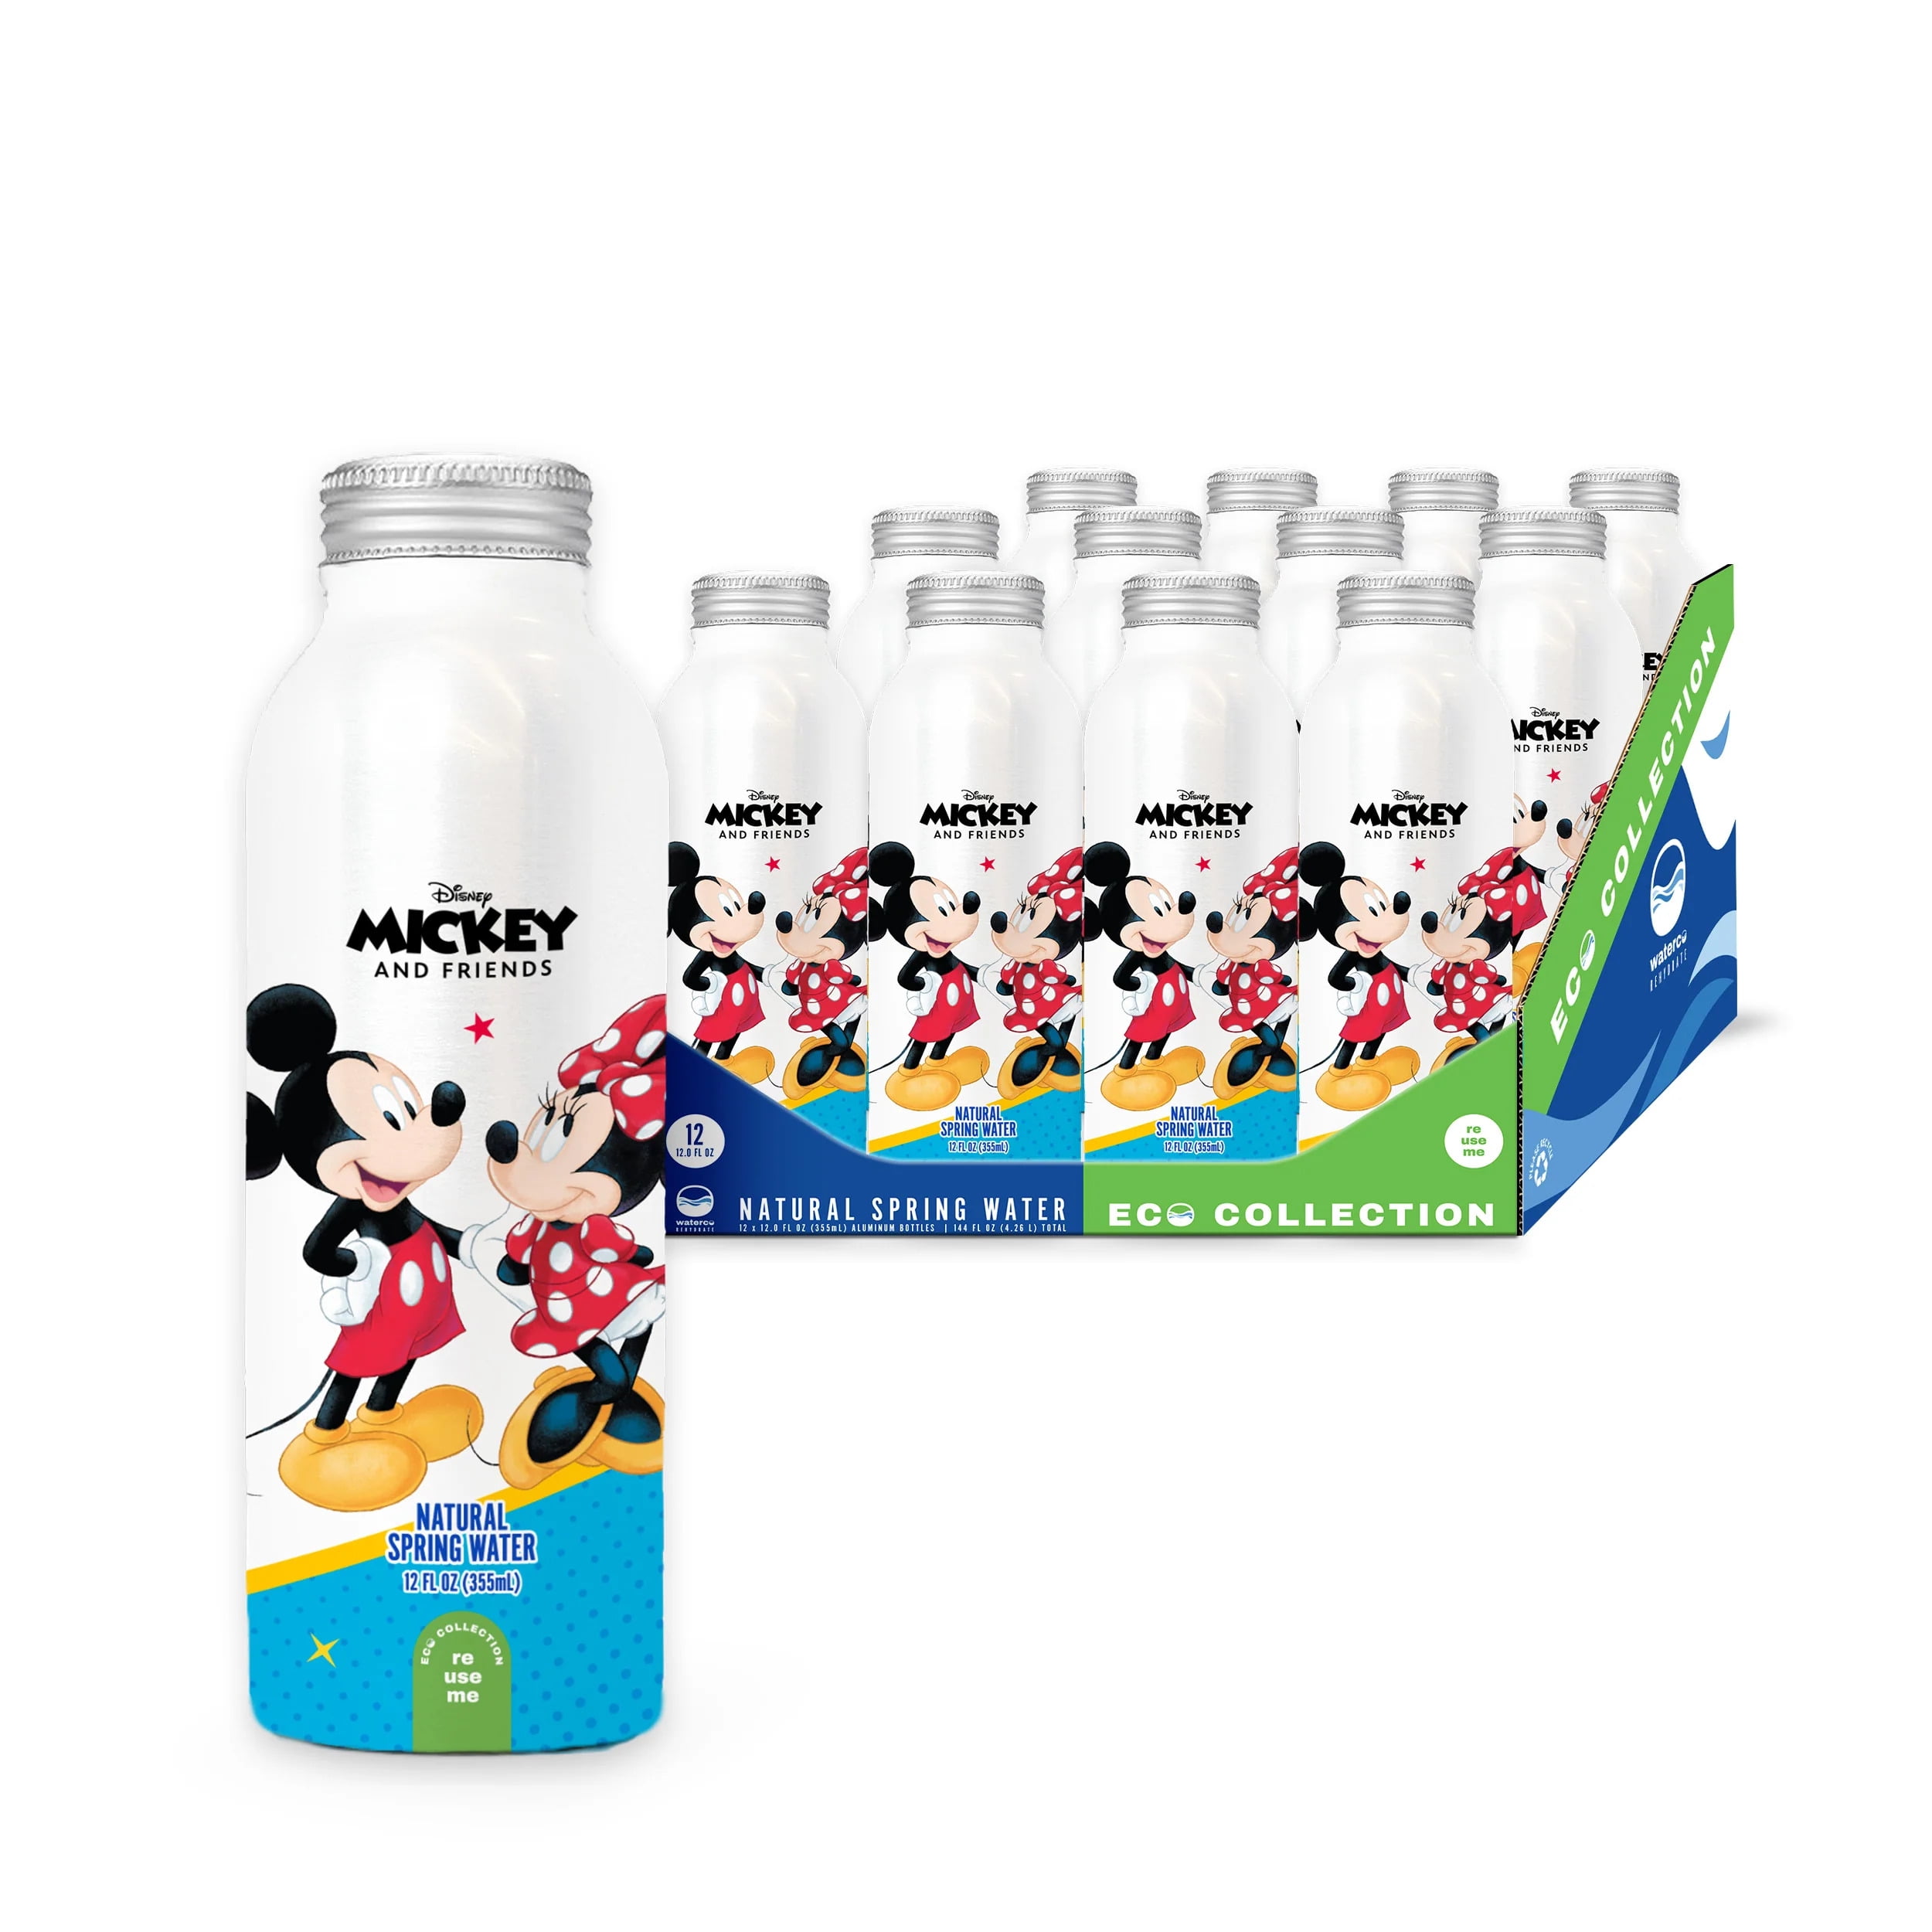 Seven20 Disney Mickey Mouse Fruit Icons Water Bottle | Holds 17 Ounces